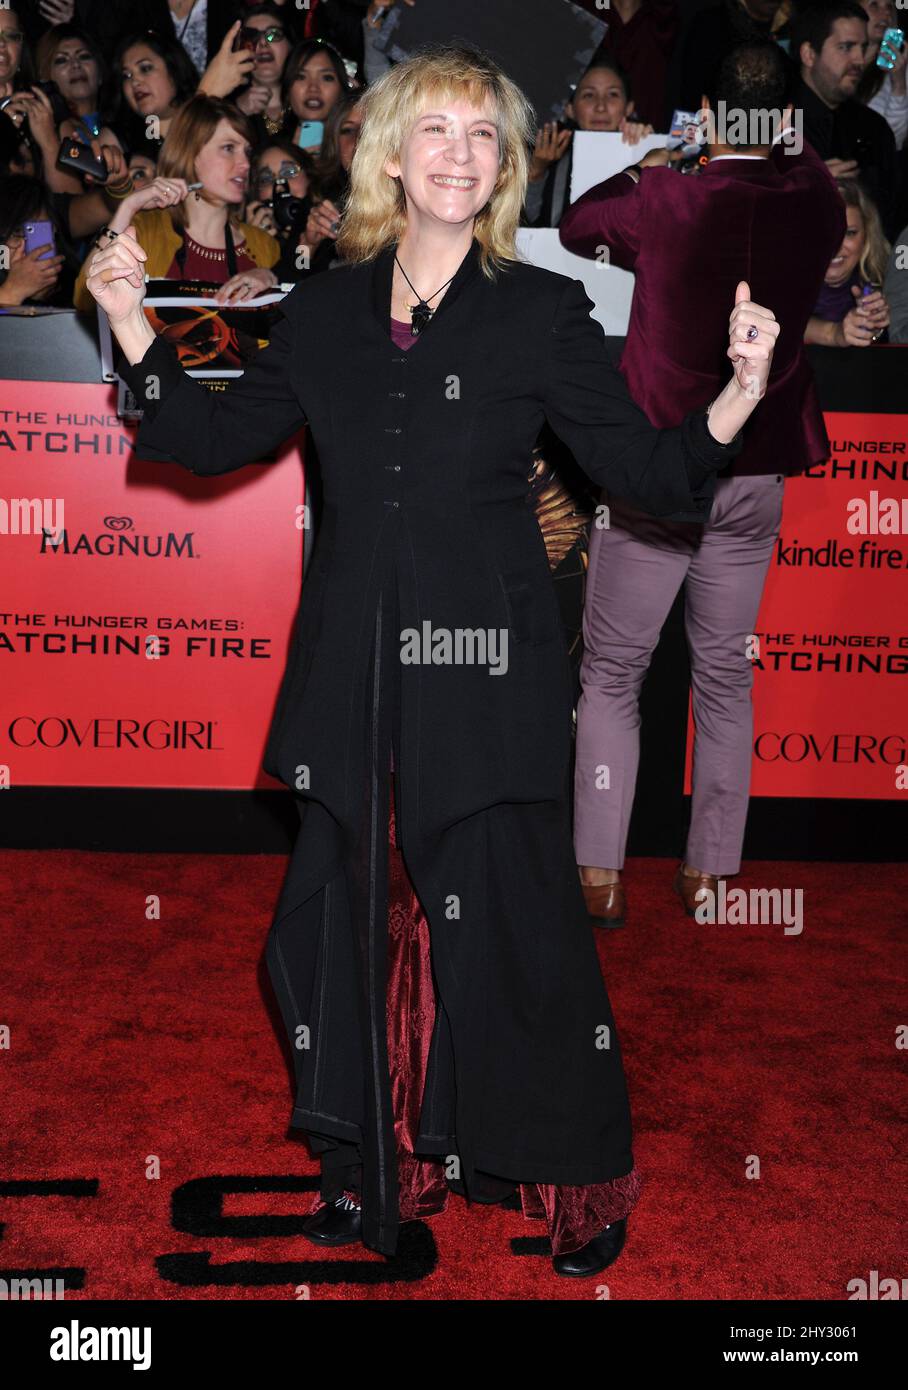 Amanda Plummer attending the premiere of 'The Hunger Games: Catching Fire' in Los Angeles, California. Stock Photo